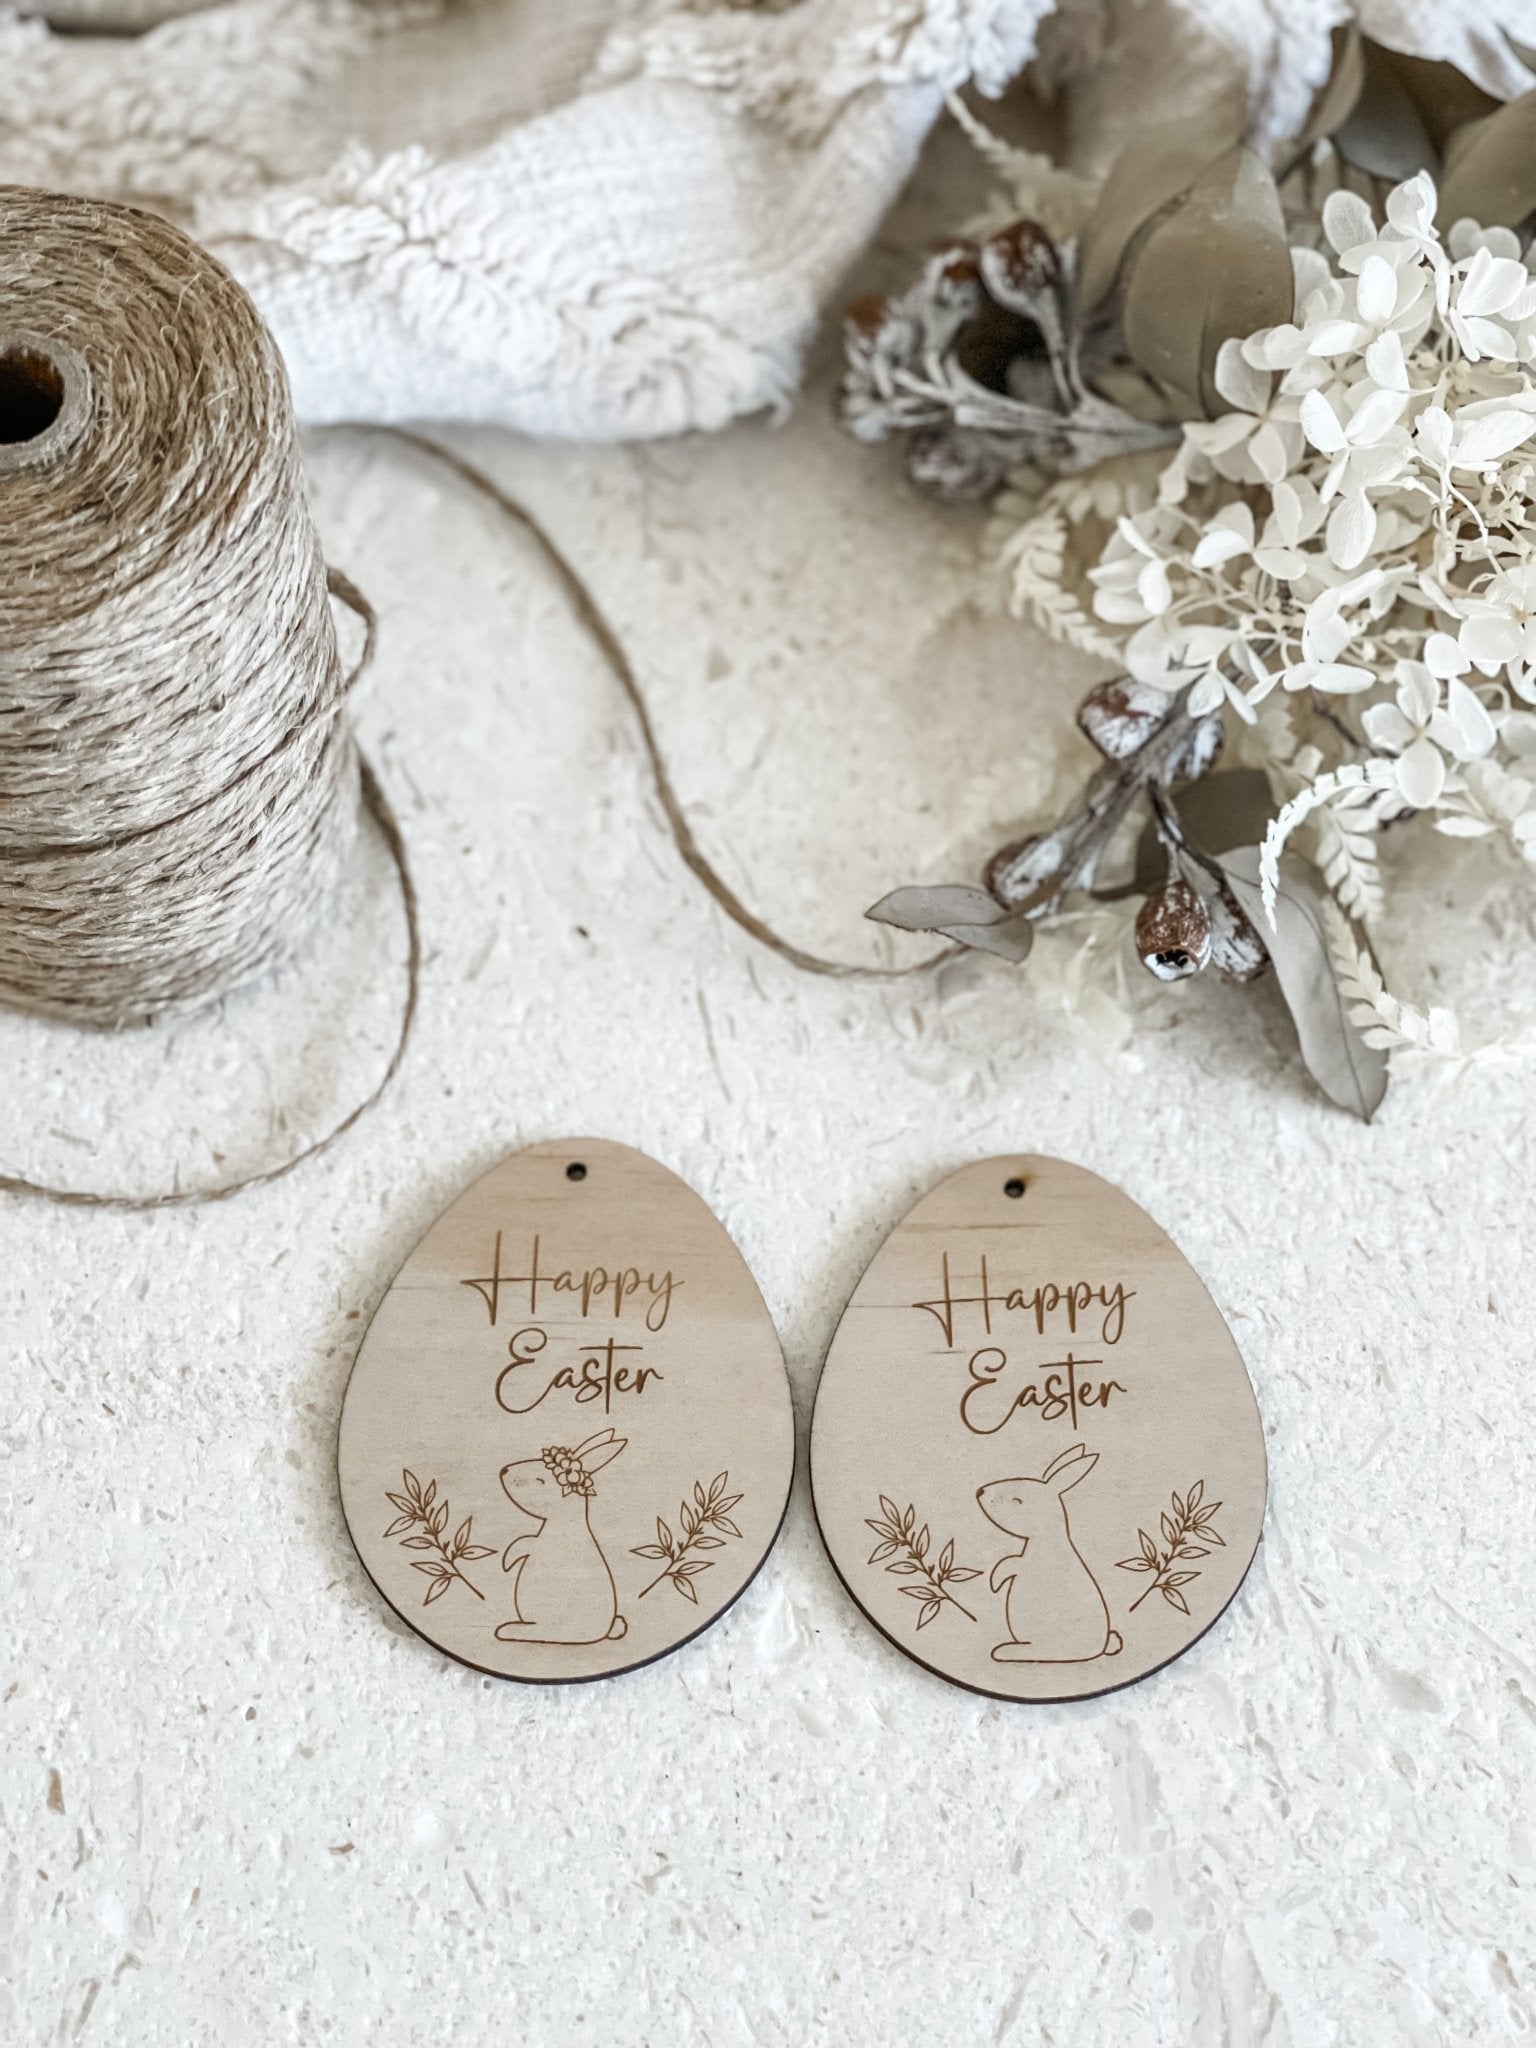 Happy Easter Tag - The Humble Gift Co.